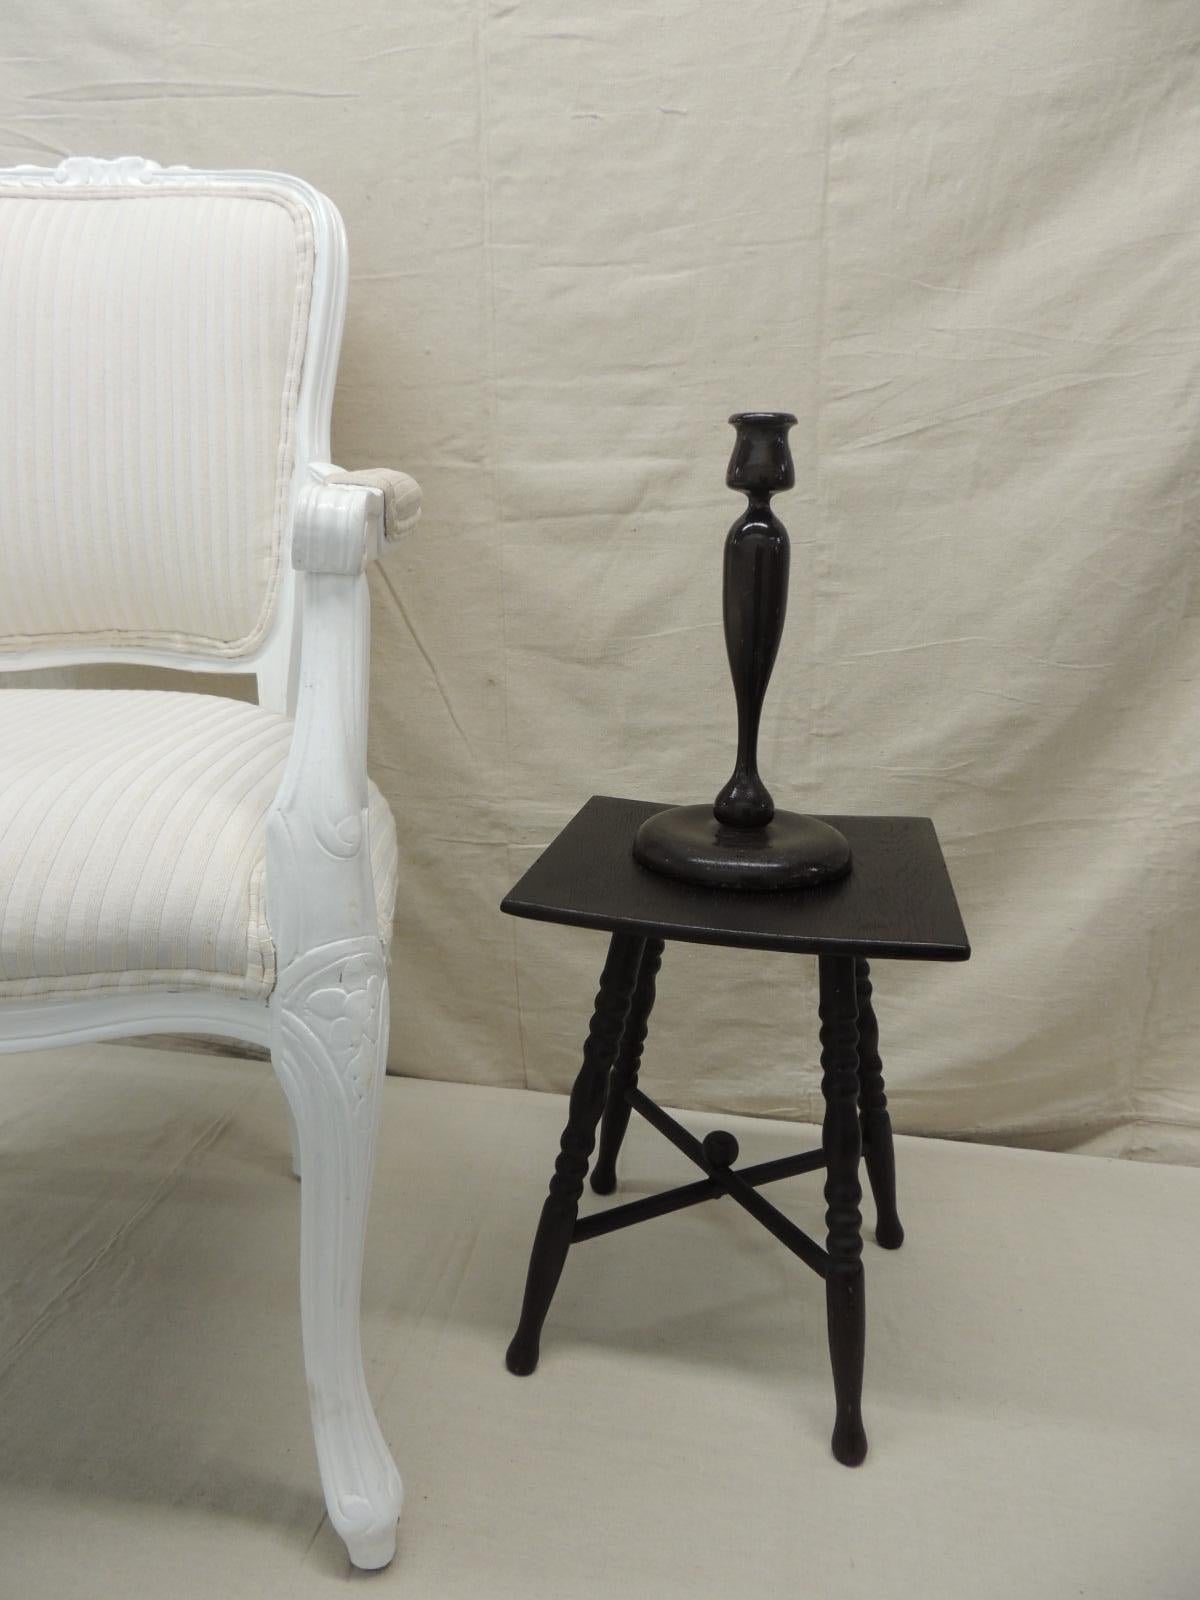 Vintage plant stand with X-base and turned bobbin legs.
Square top, four leg stand. Very sturdy. Dark wood lacquered legs, mate weathered finished top.
Arts & Crafts style
Size: 11